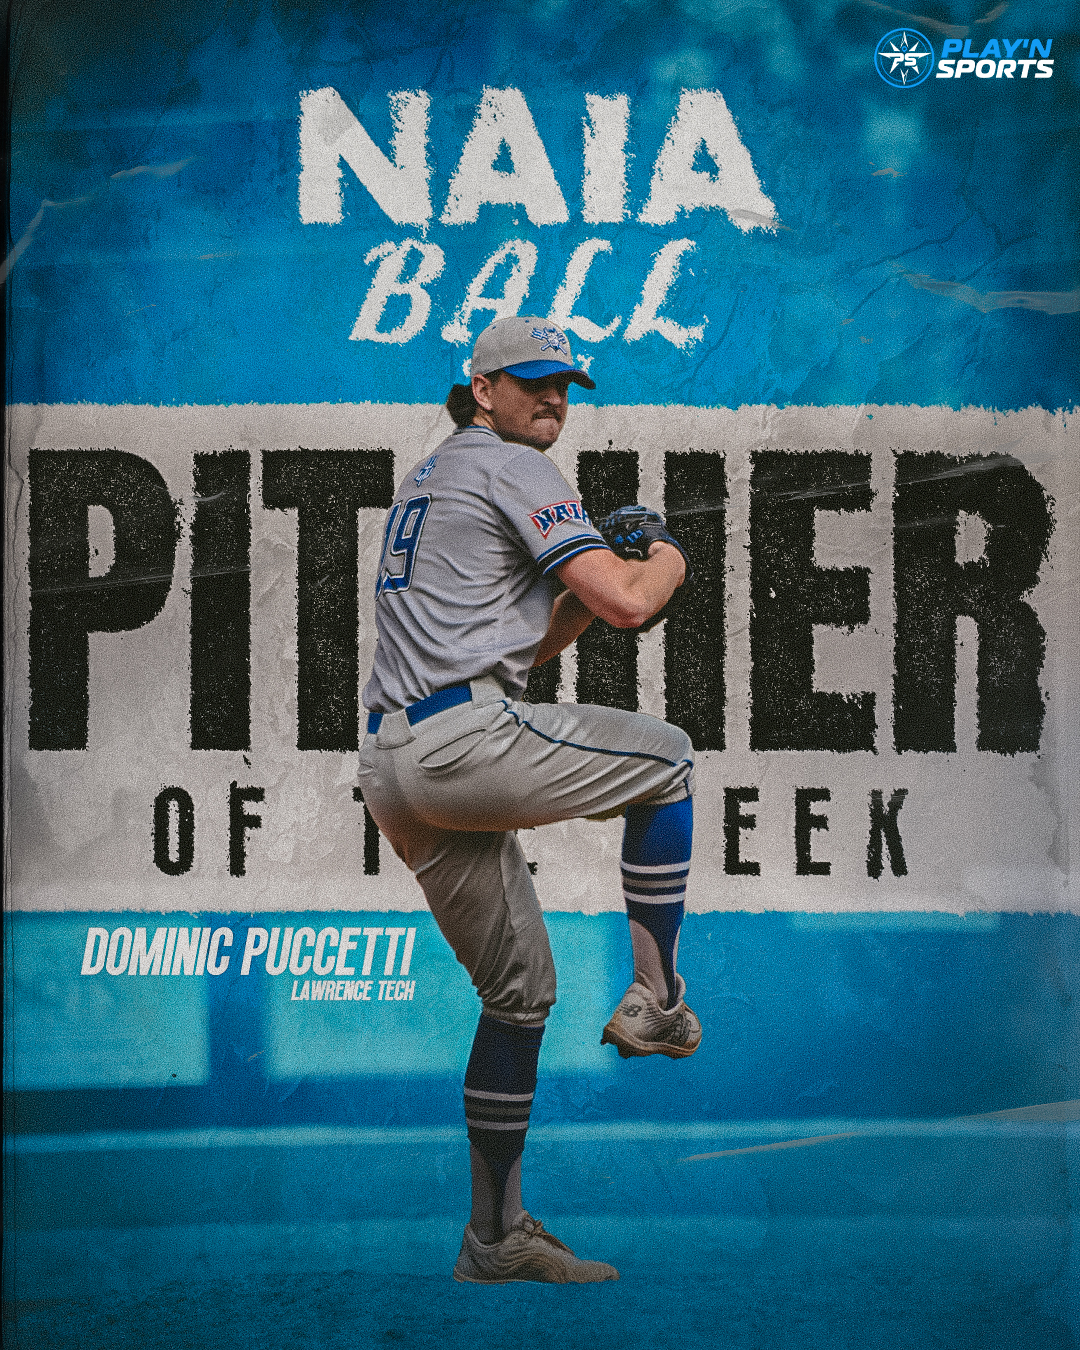 NAIA Ball Pitcher of the week